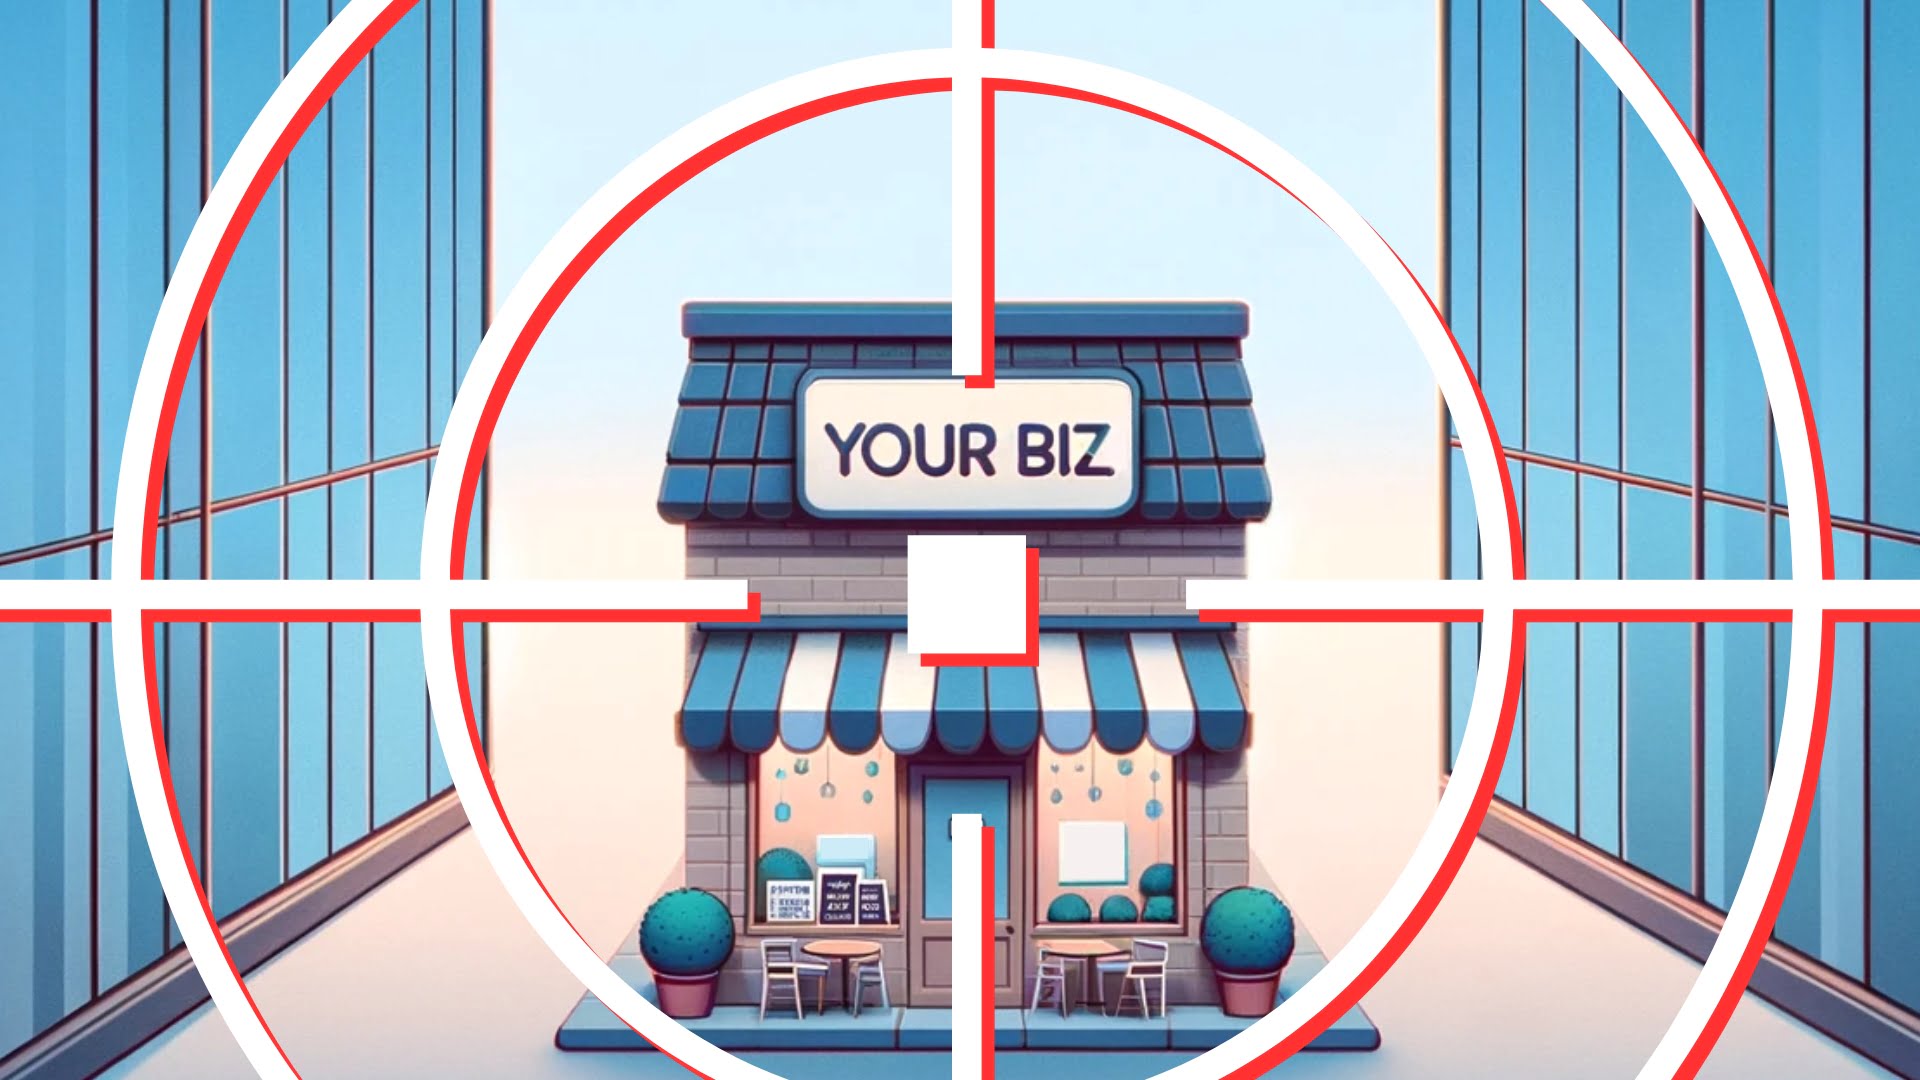 Don’t think your business is a target Think again Article Image